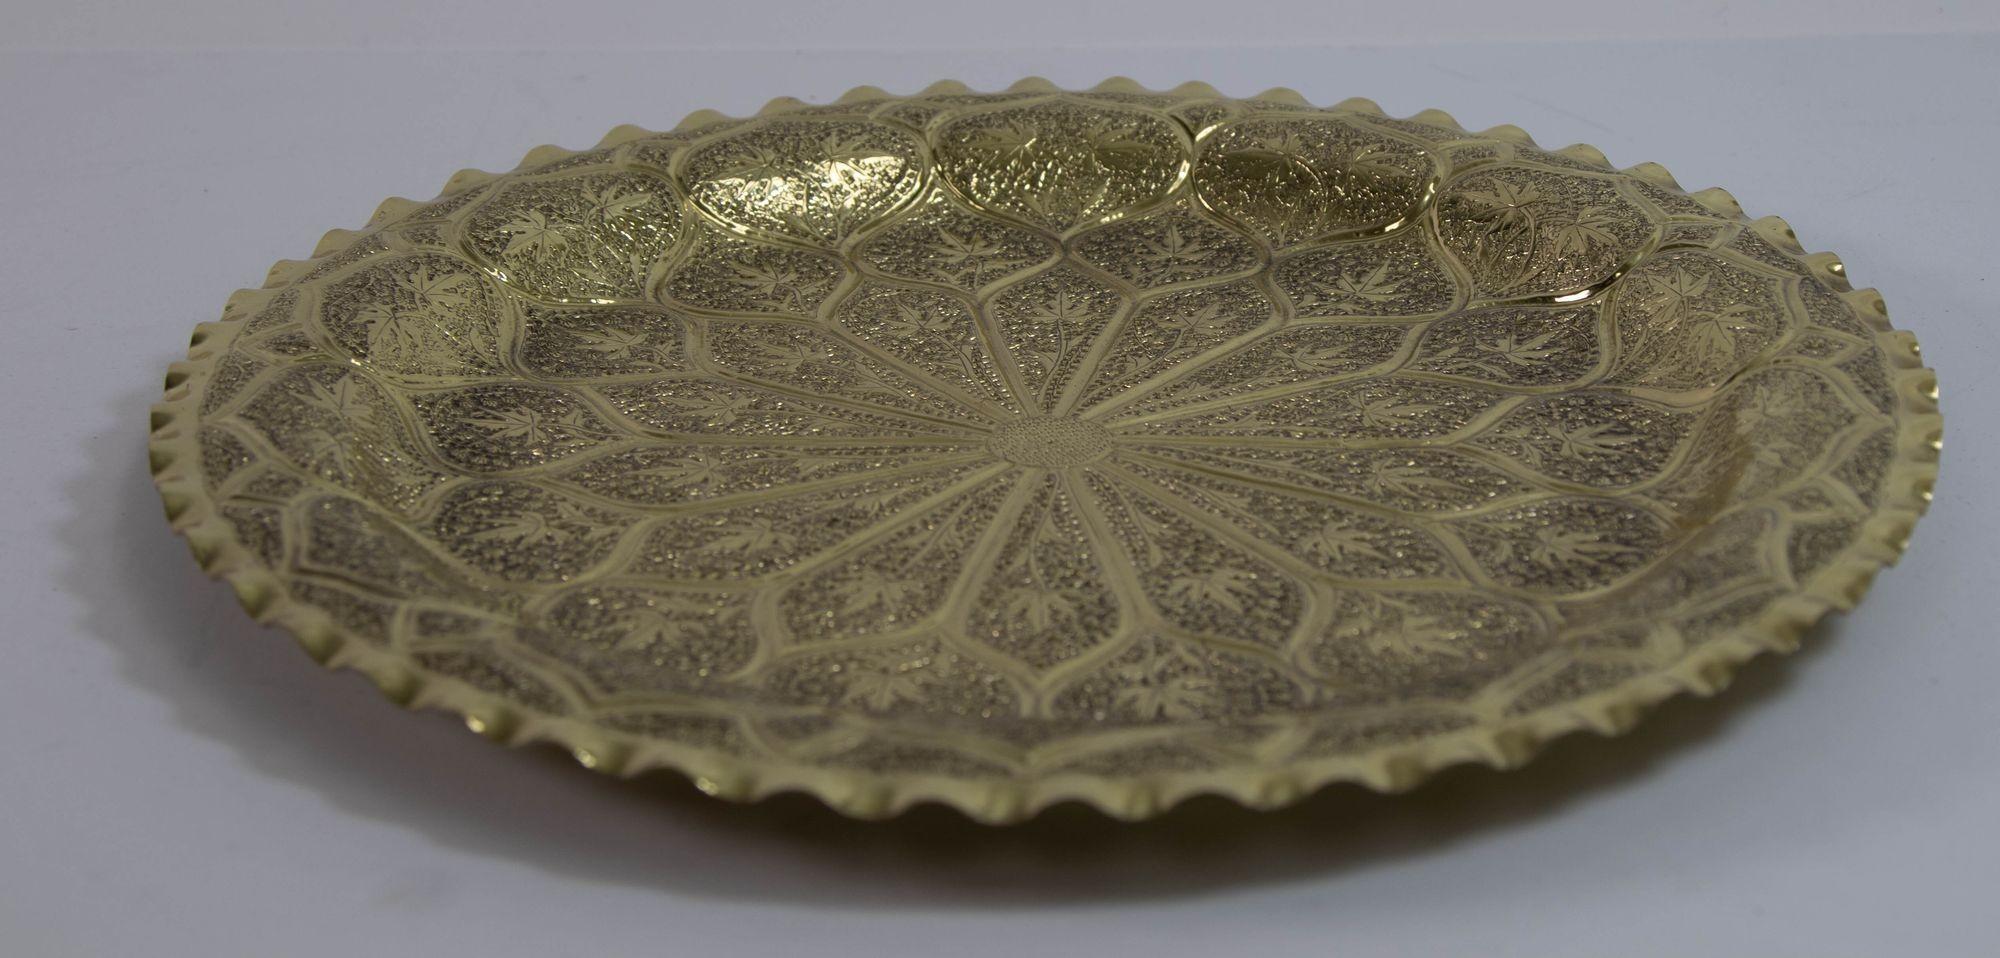 Moroccan Brass Tray Moorish Islamic Metalwork 13 inches Diameter In Good Condition For Sale In North Hollywood, CA